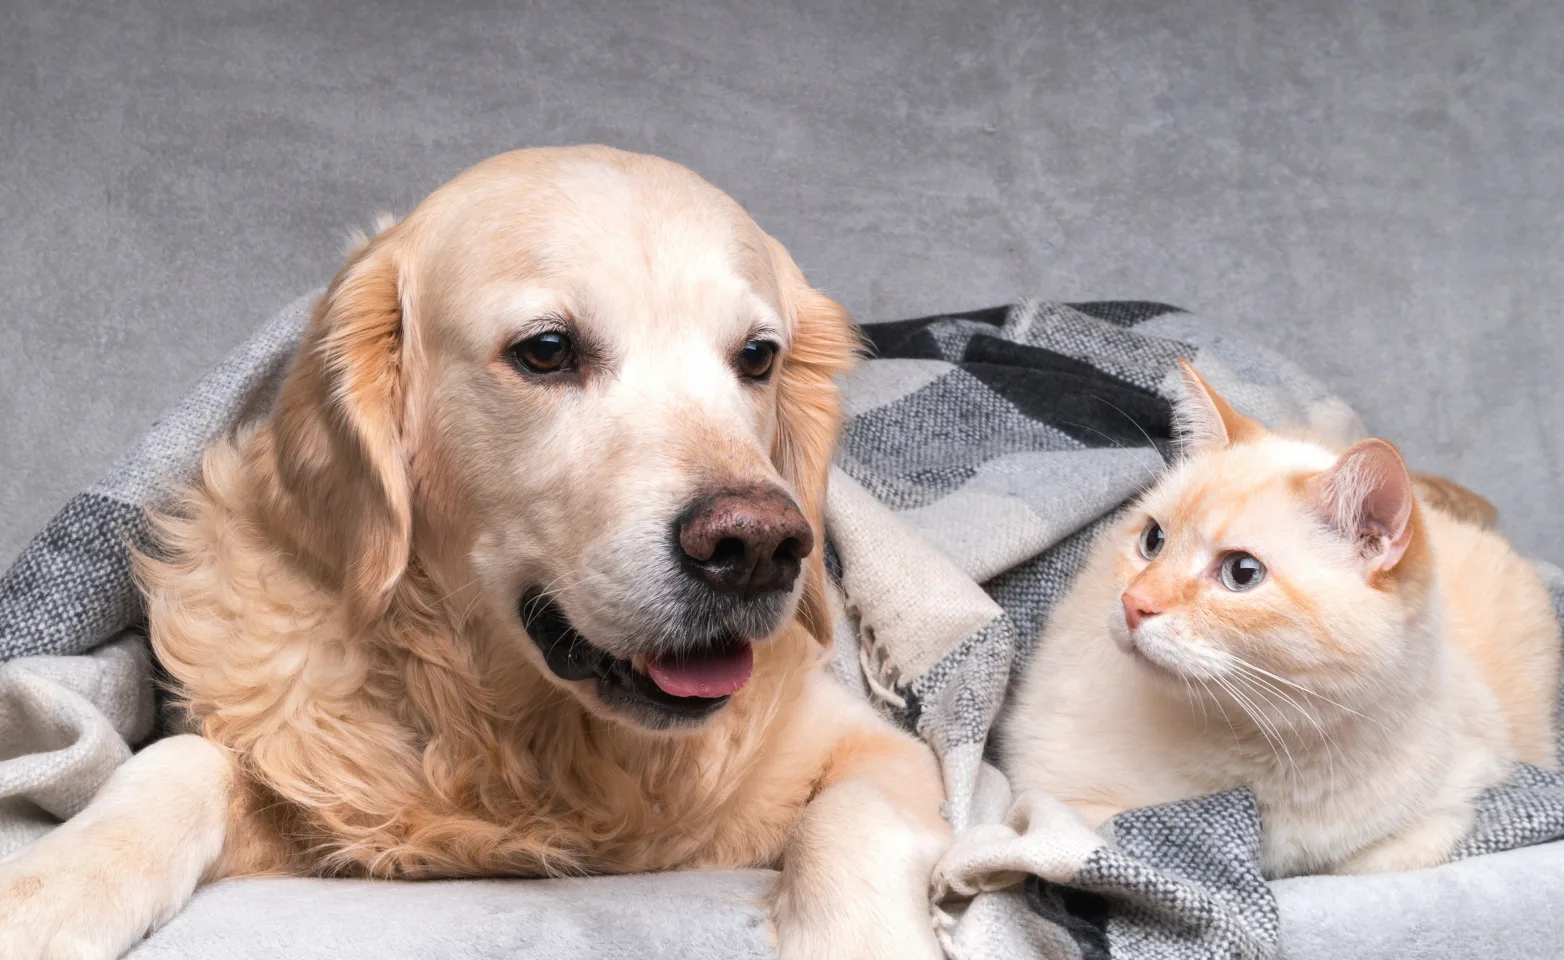 Dog and cat laying on a couch wrapped in a blanket